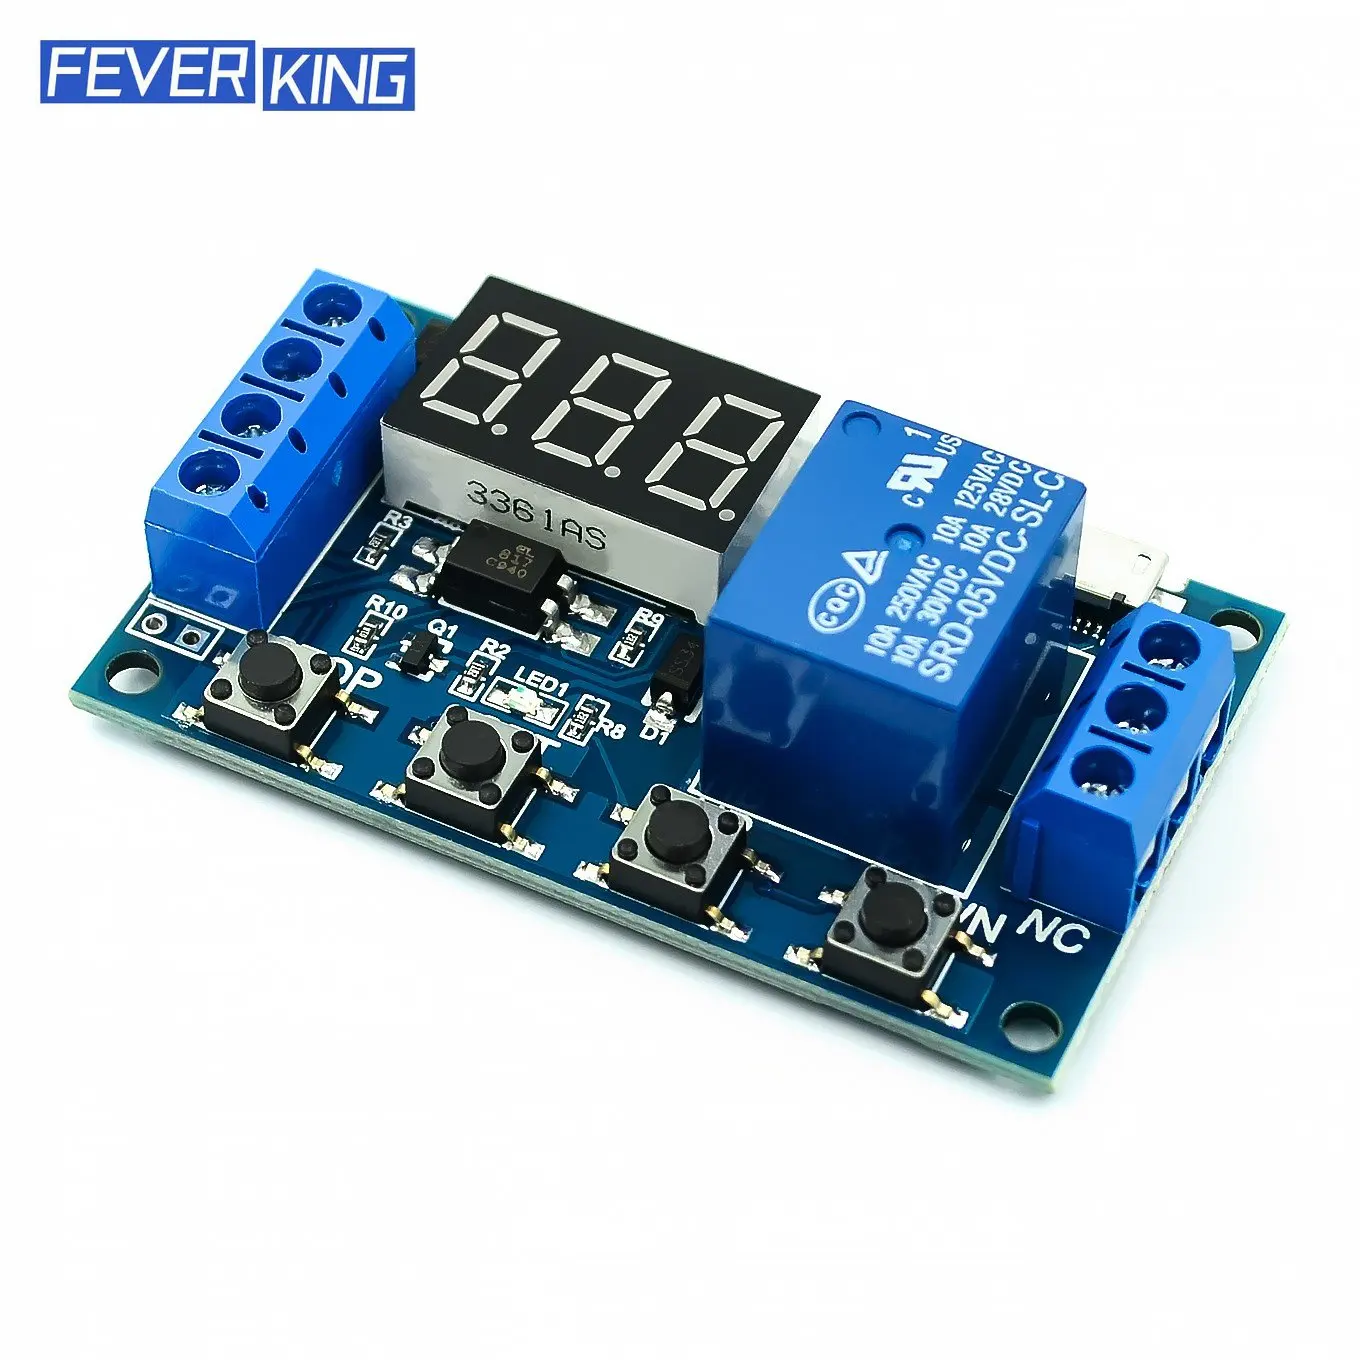 

6-30V Relay Module Switch Trigger Time Delay Circuit Timer Cycle Adjustable Trigger OFF / ON Switch Timing Cycle for Arduino